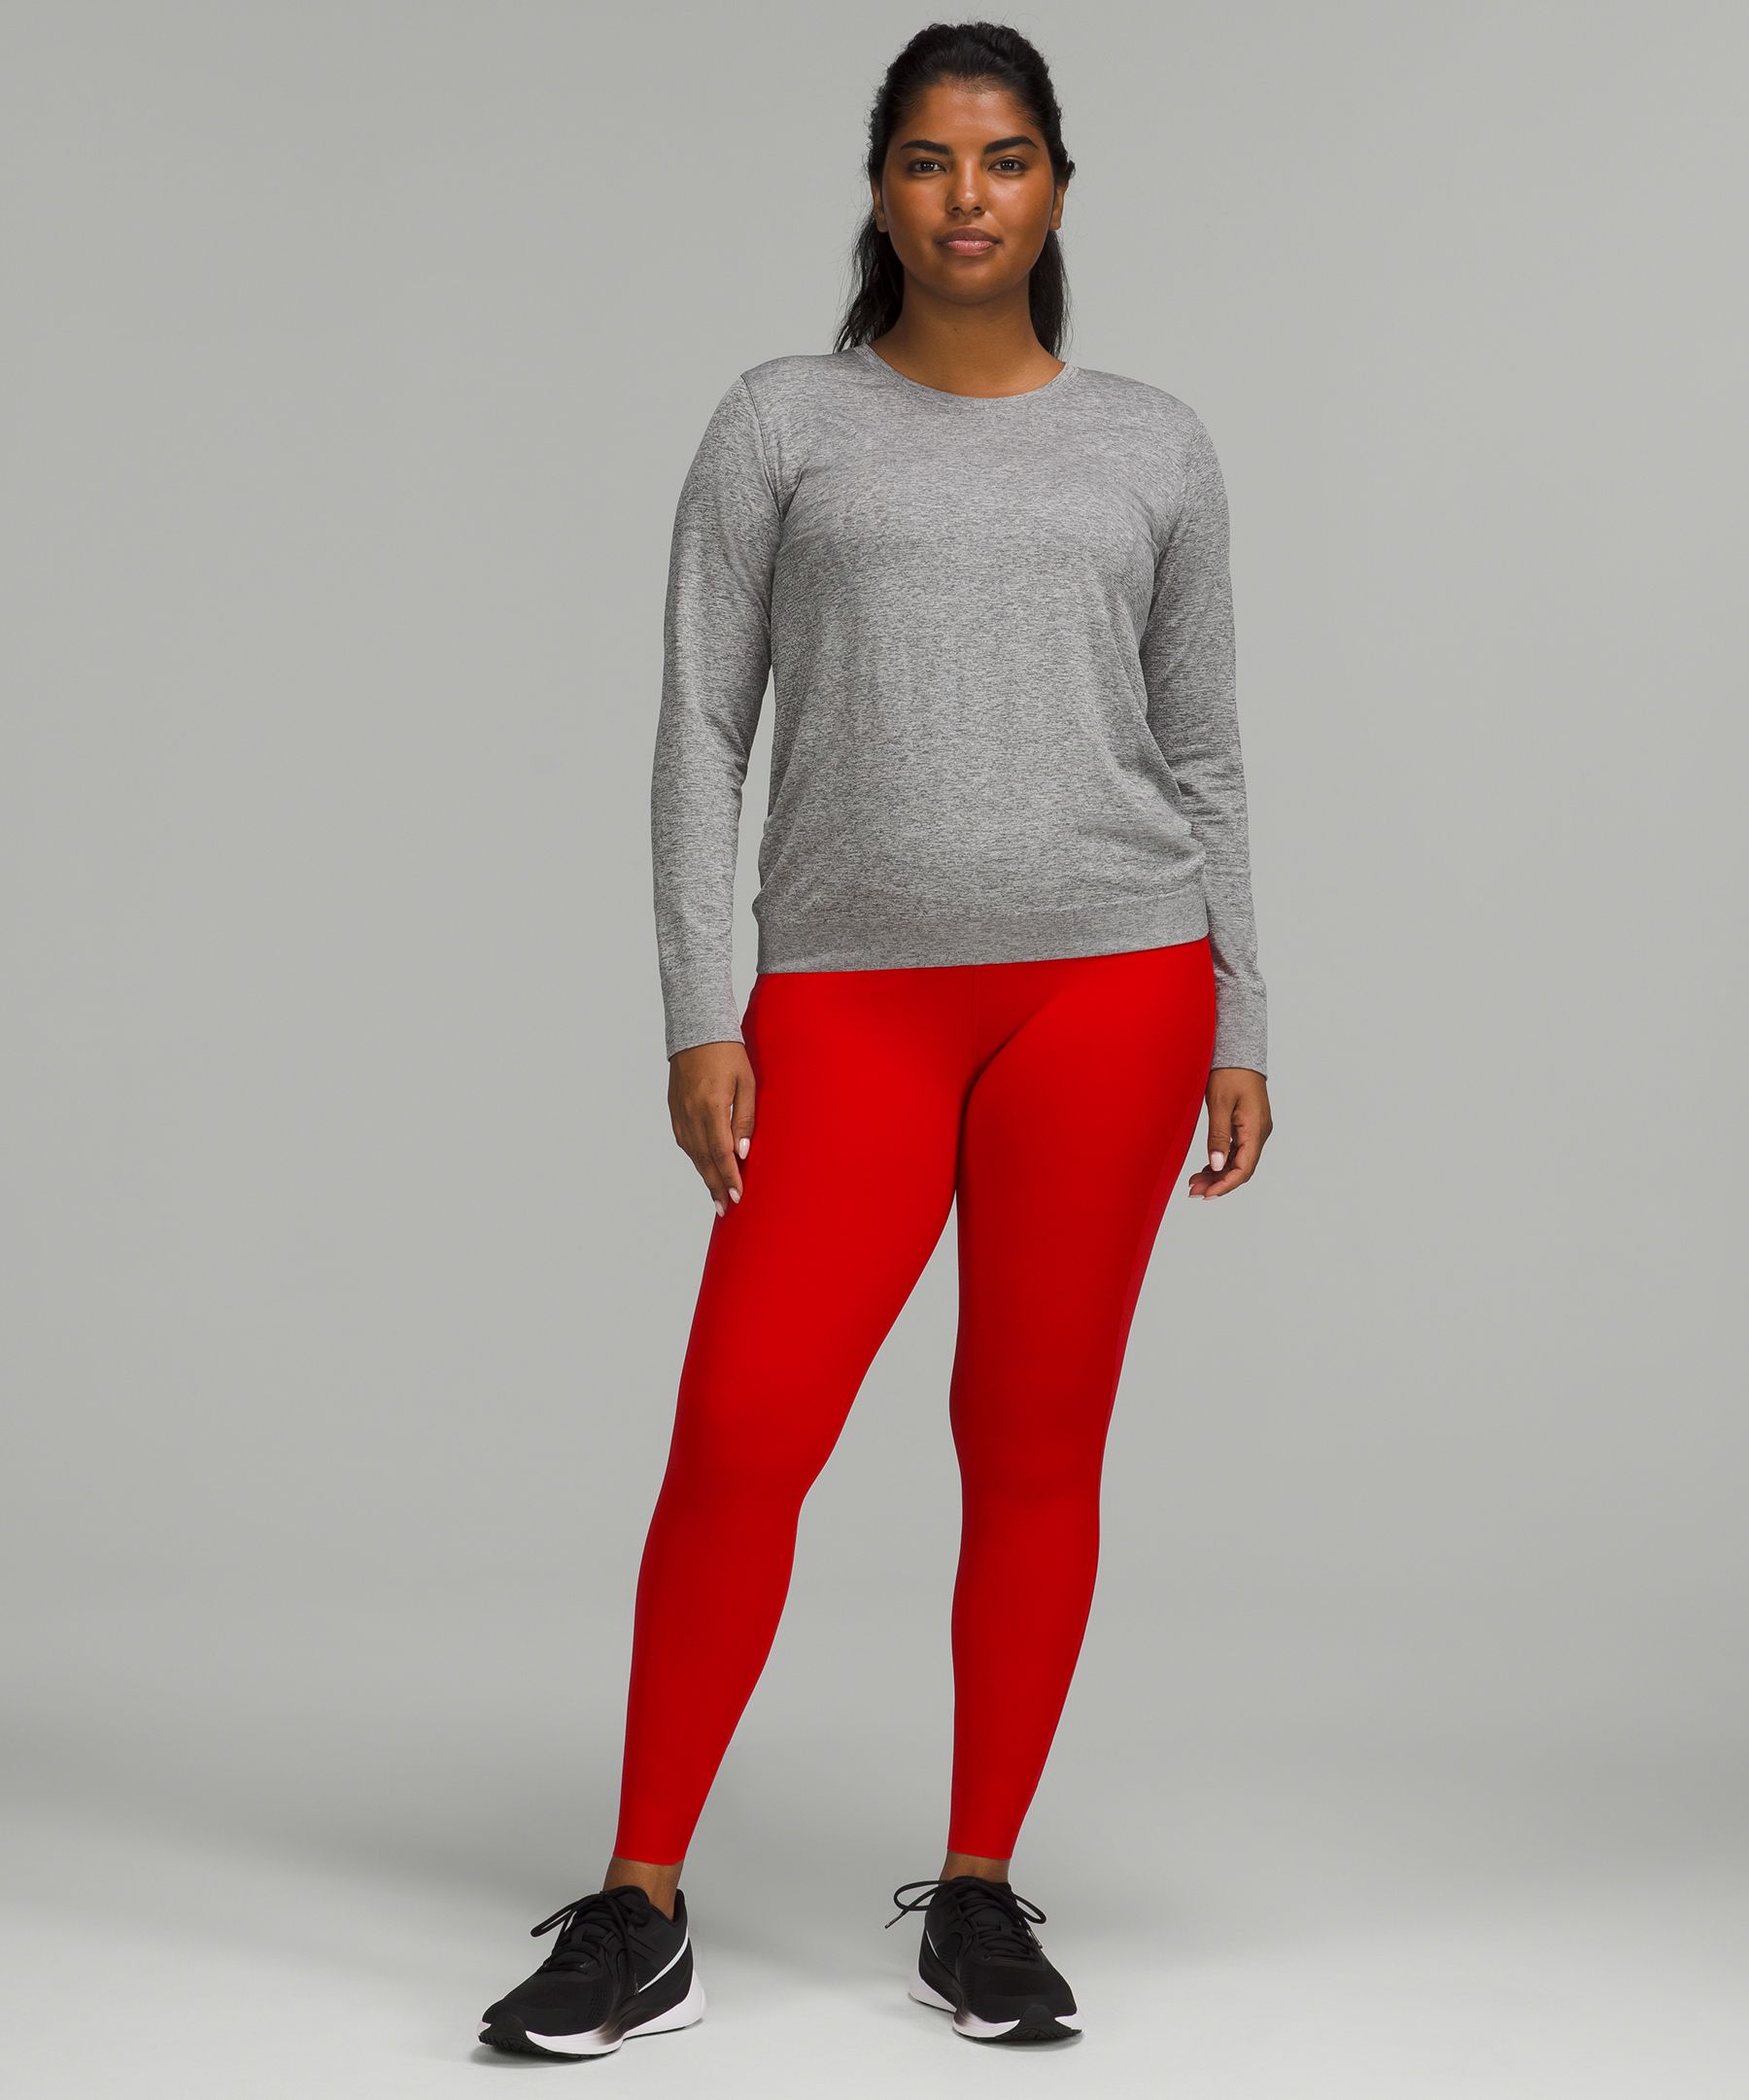 Lululemon Base Pace High-rise Running Tights 28 Brushed Nulux - Dark Red